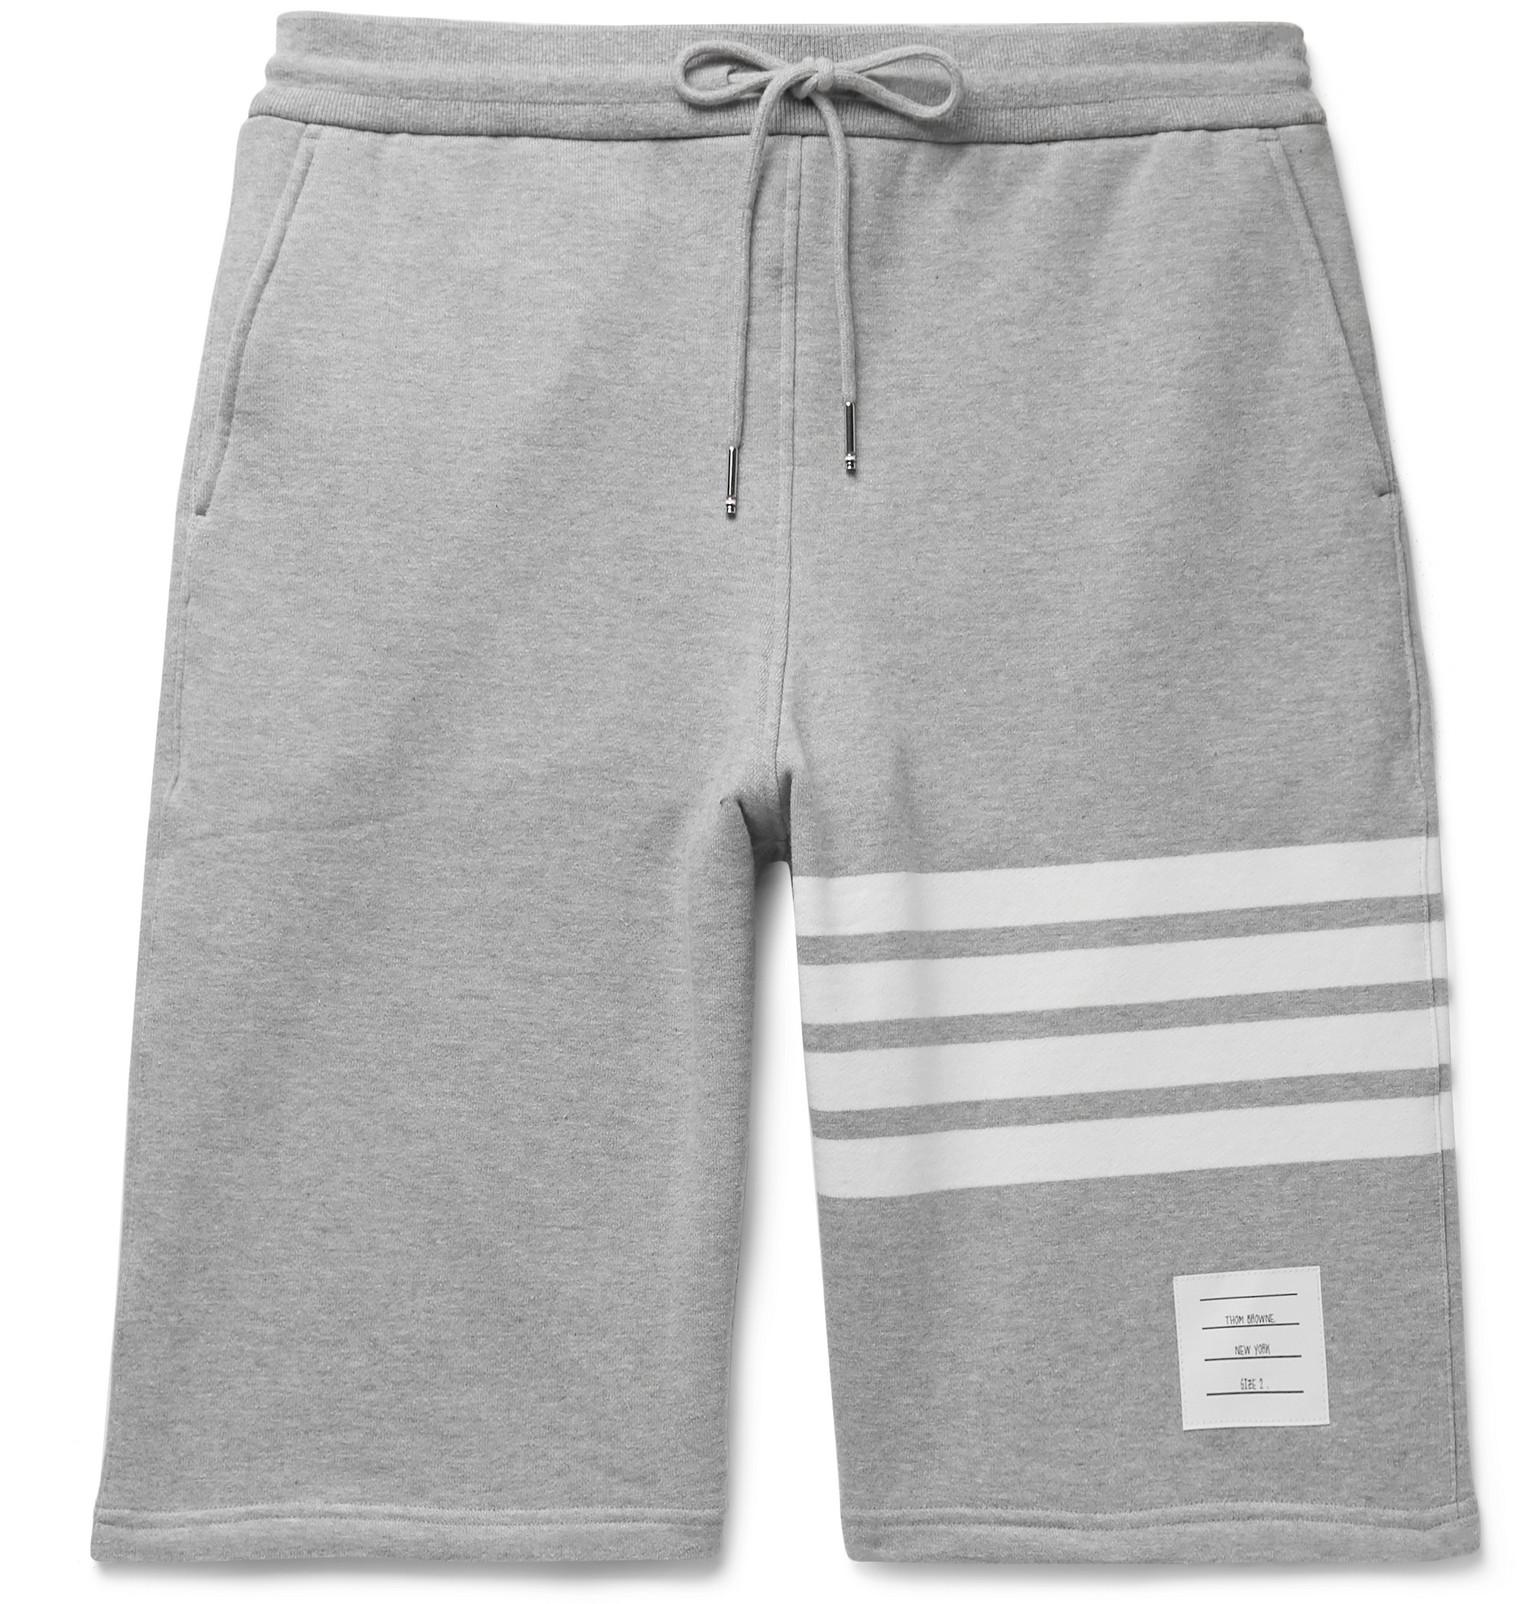 Thom Browne Striped Loopback Cotton-jersey Shorts in Gray for Men - Lyst